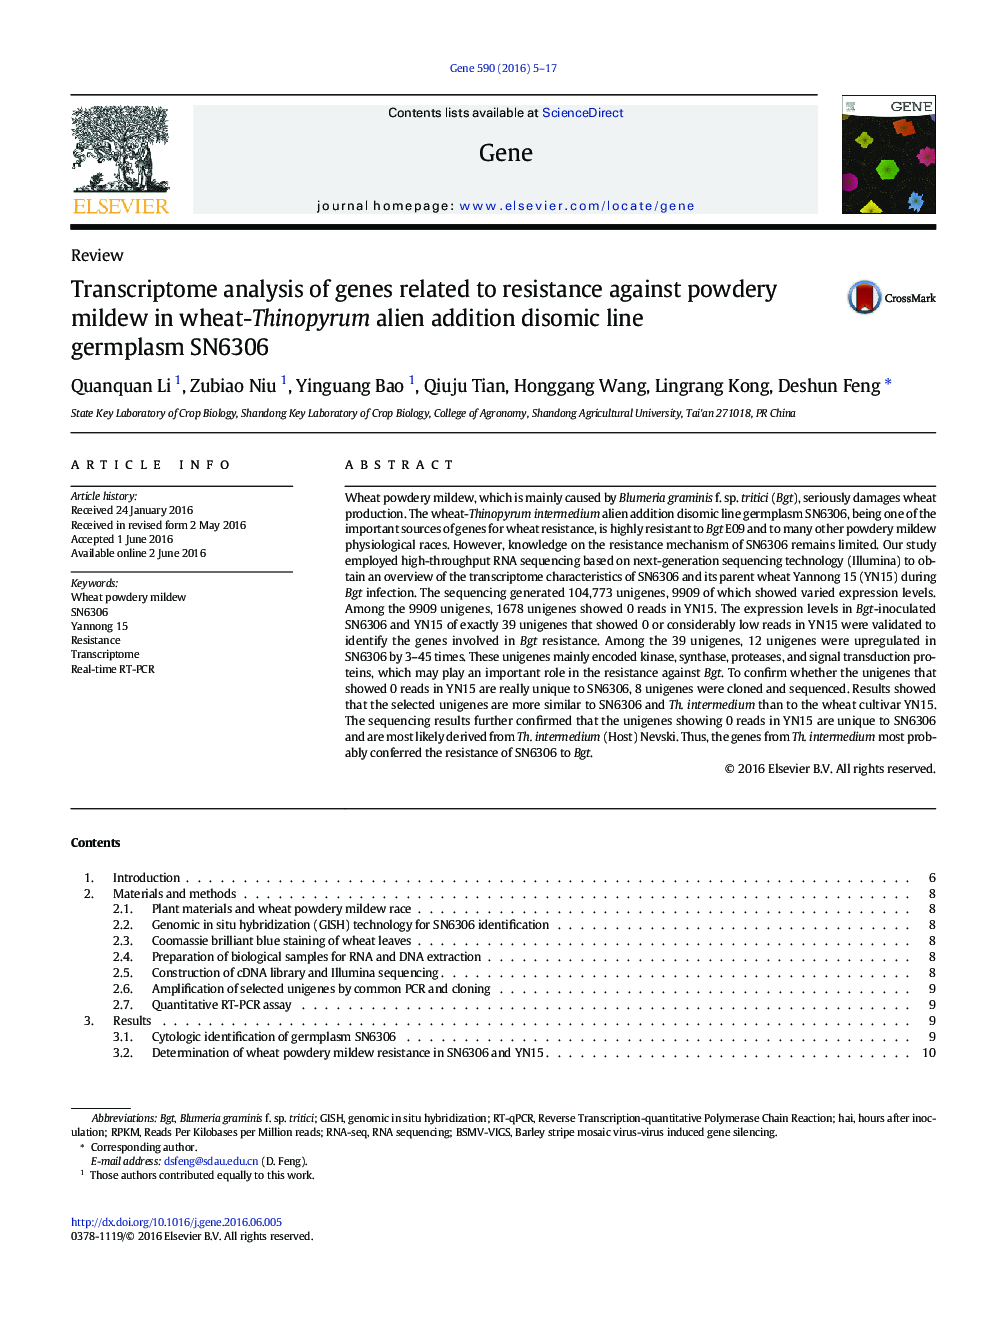 Transcriptome analysis of genes related to resistance against powdery mildew in wheat-Thinopyrum alien addition disomic line germplasm SN6306